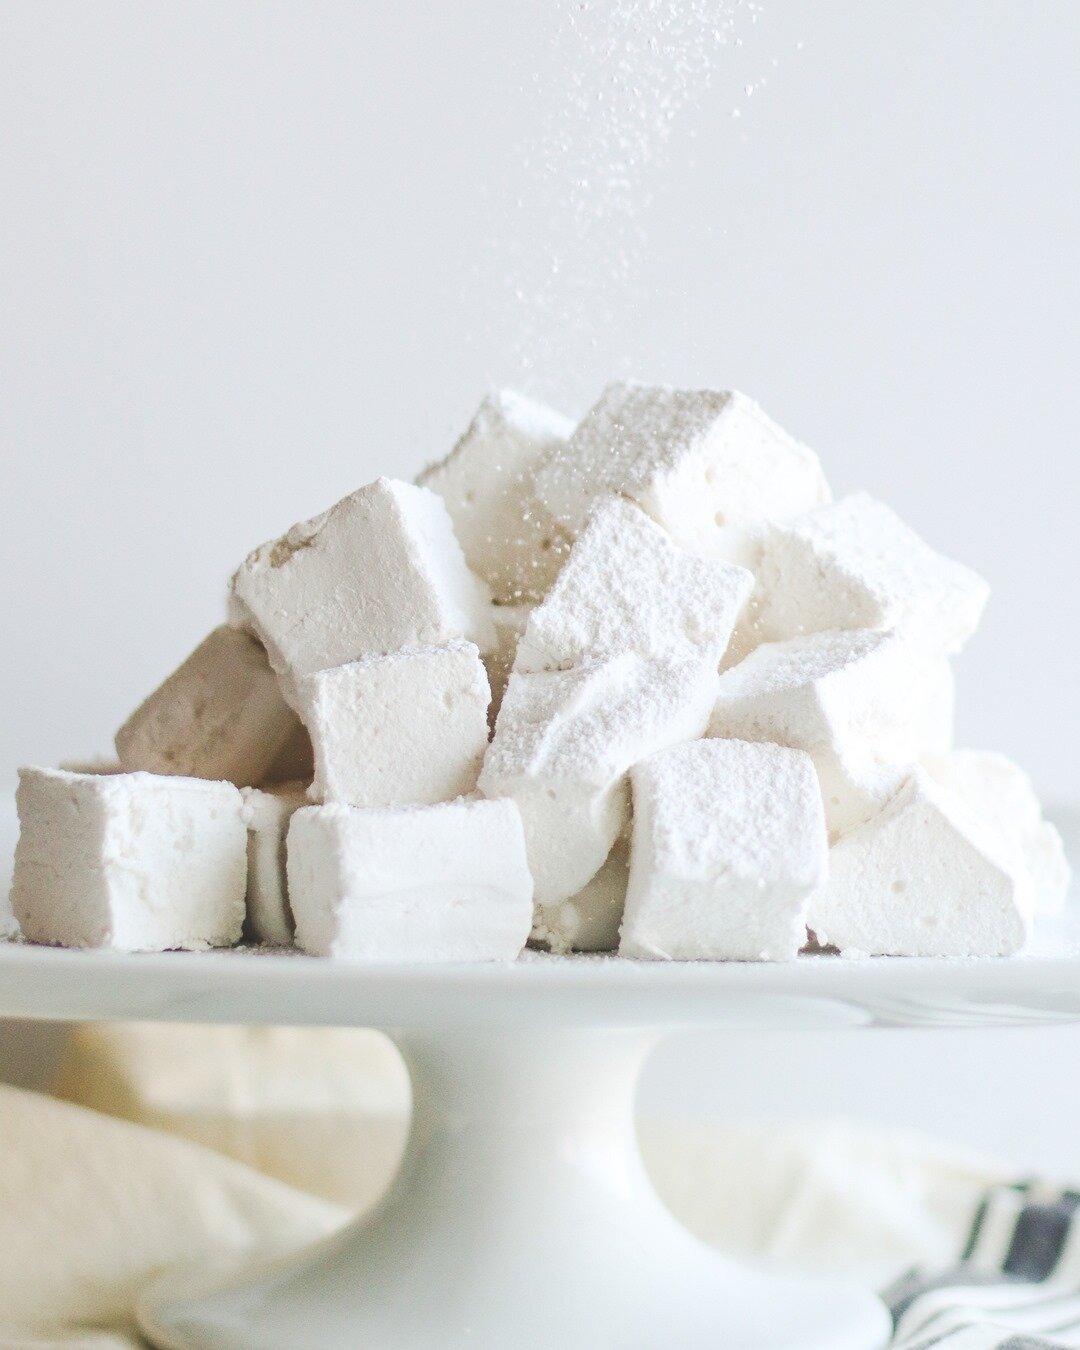 | HOMEMADE MARSHMALLOWS |⠀⠀⠀⠀⠀⠀⠀⠀⠀
I&rsquo;ve been making these no corn syrup marshmallows for a few years now and the excitement is still there each time I cube them and sprinkle on some powder sugar. I cannot wait to sink my teeth into these incred